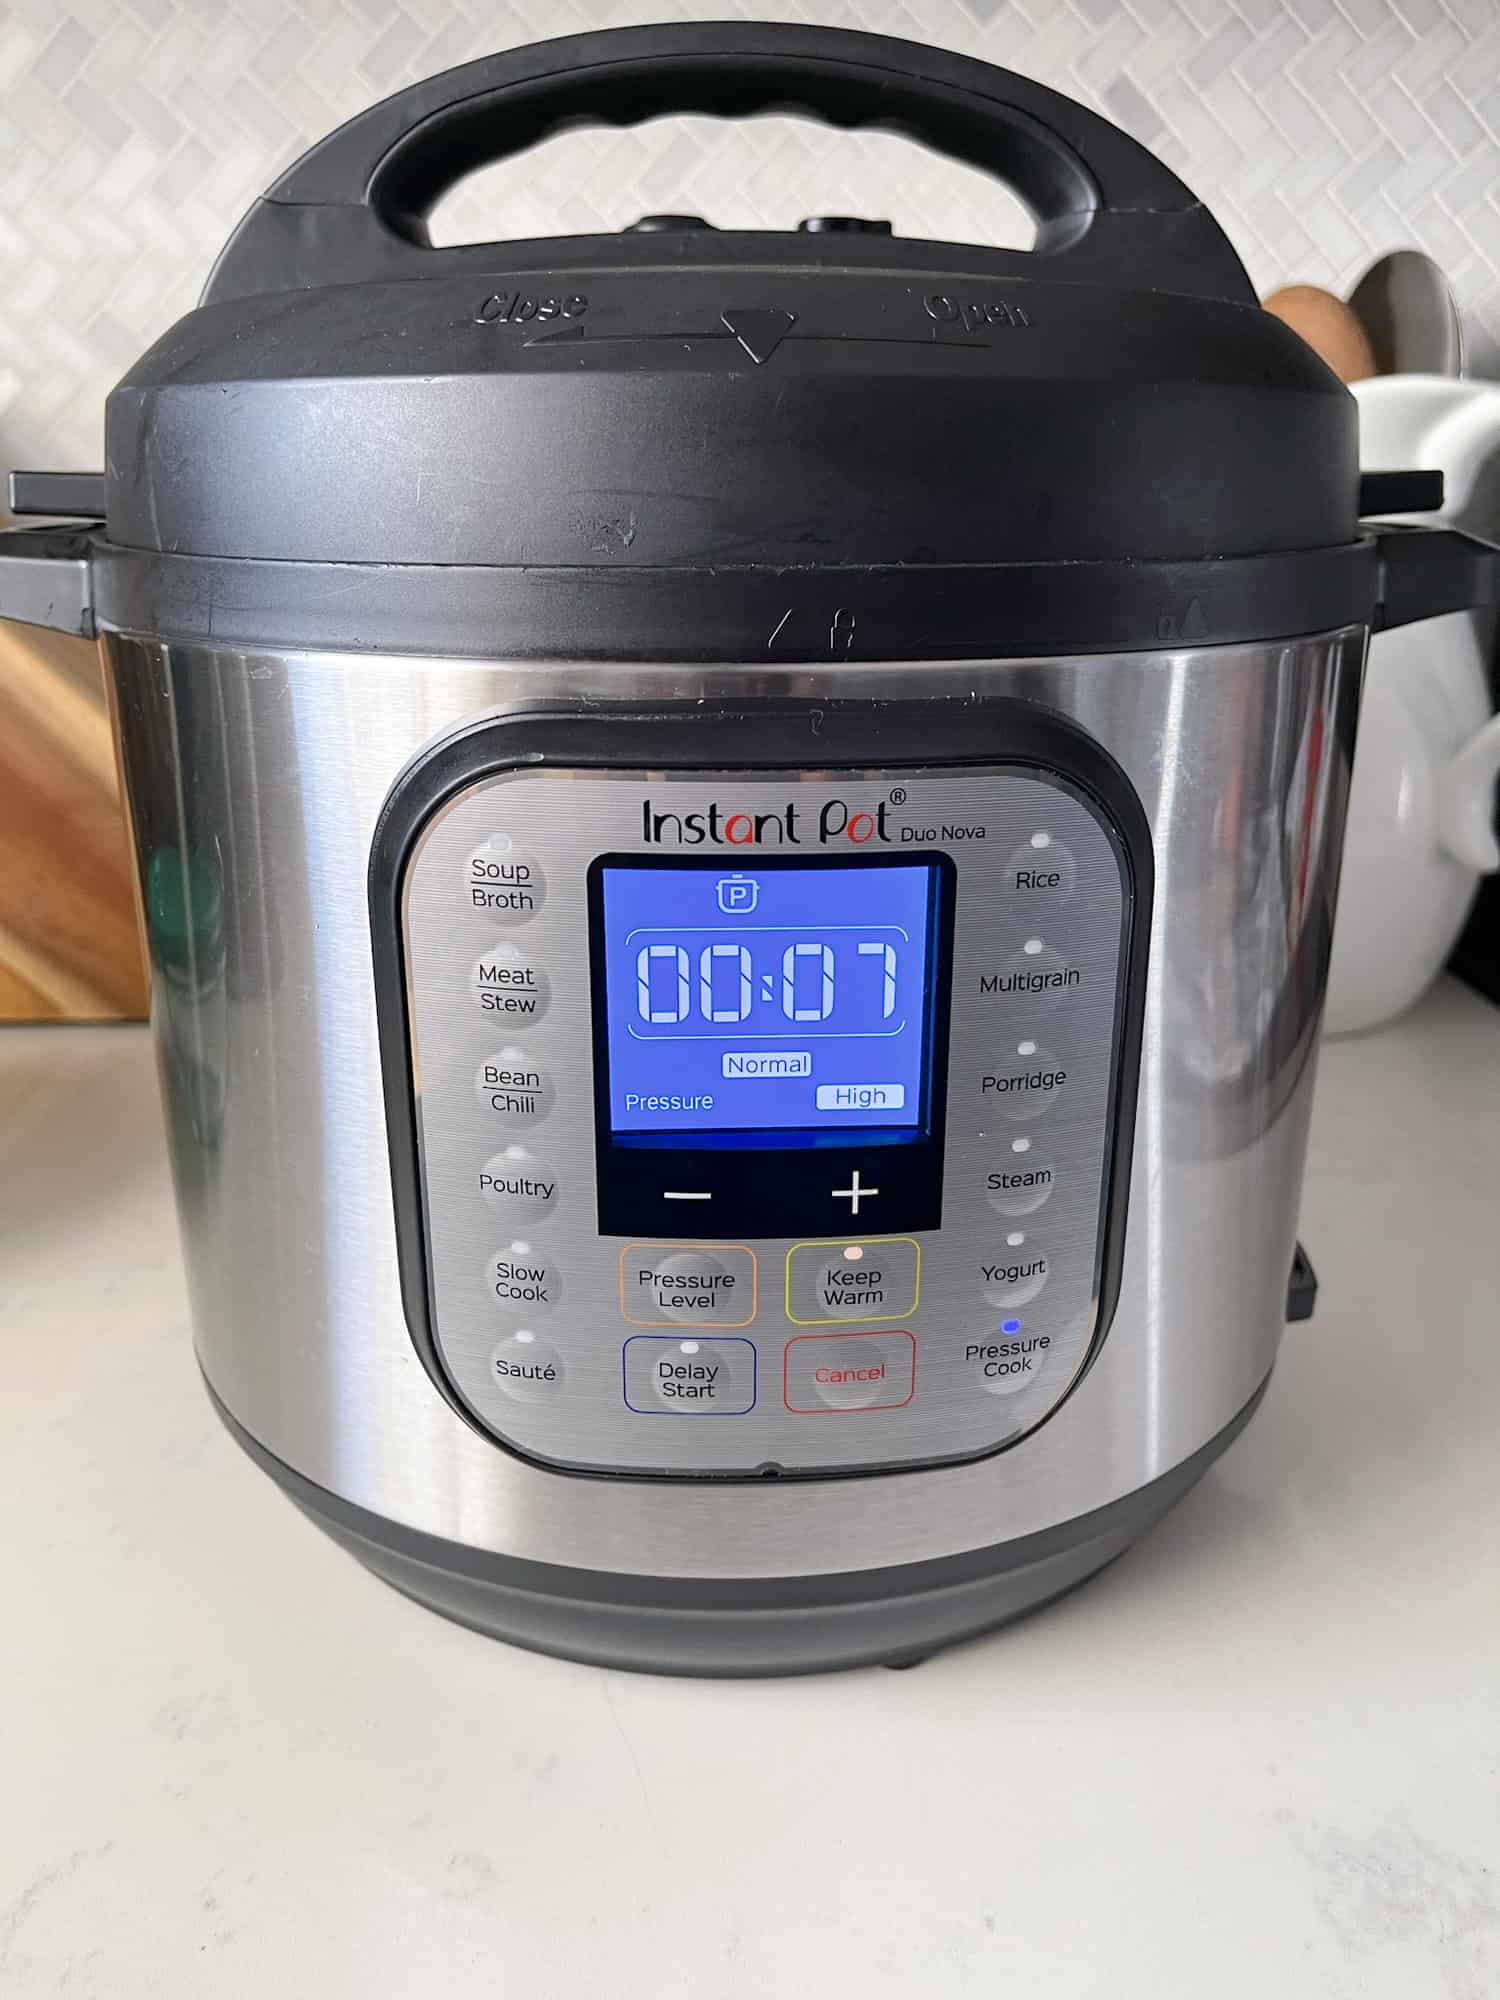 Instant Pot with high pressure set to 7 minutes